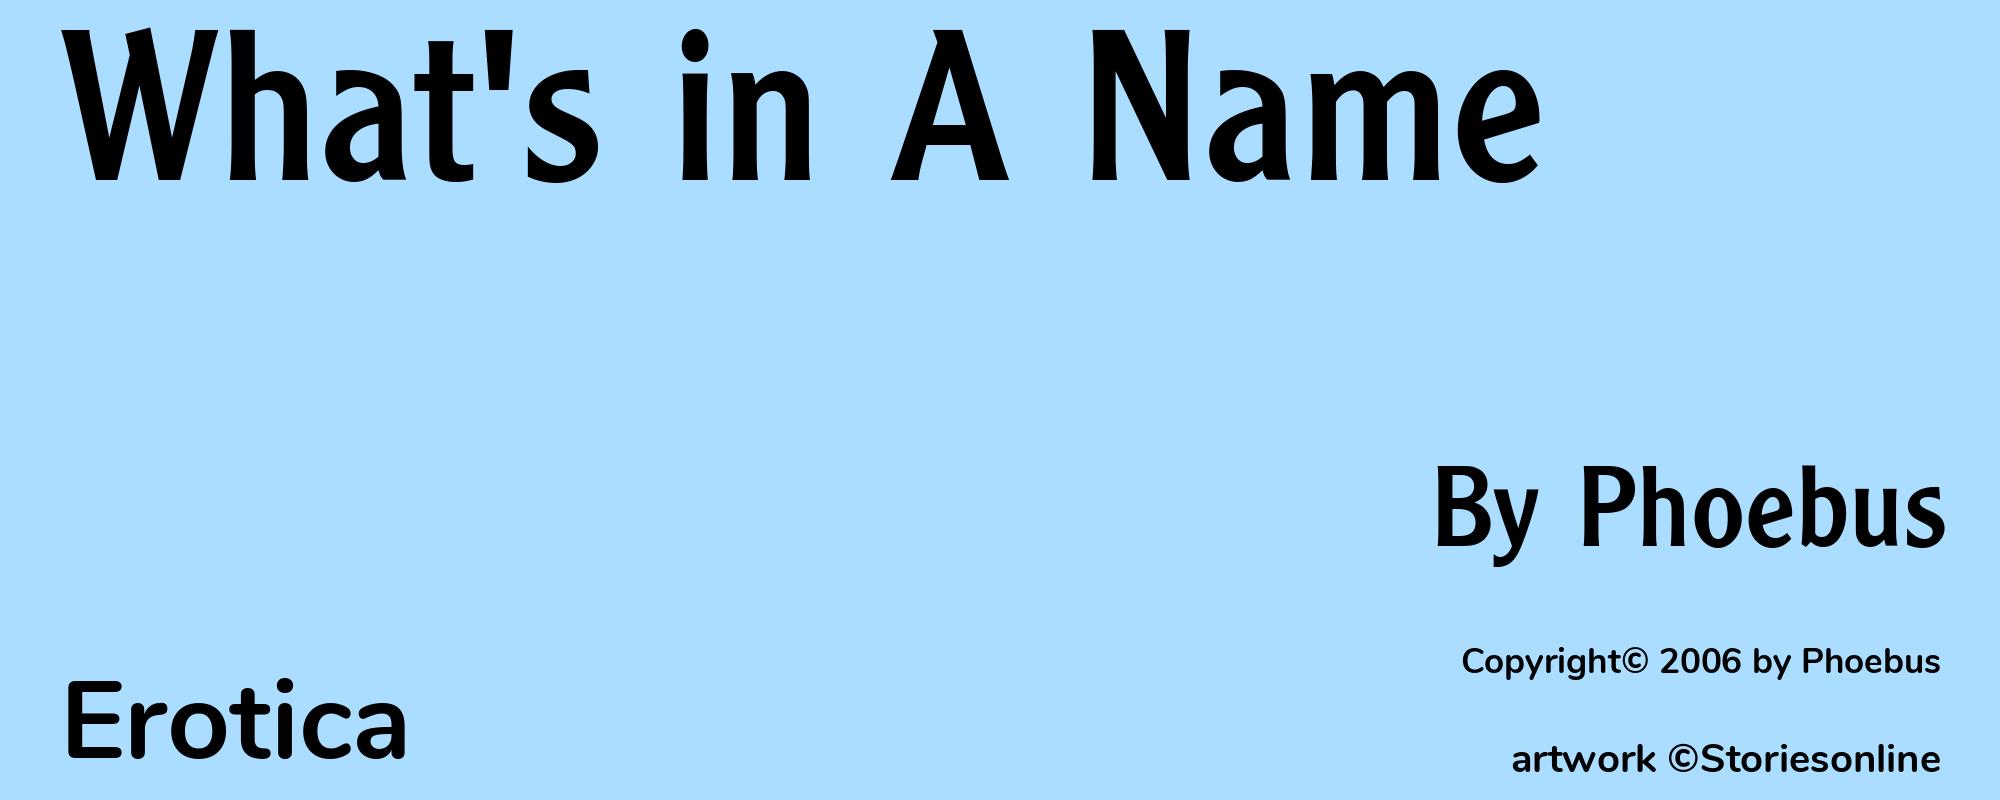 What's in A Name - Cover